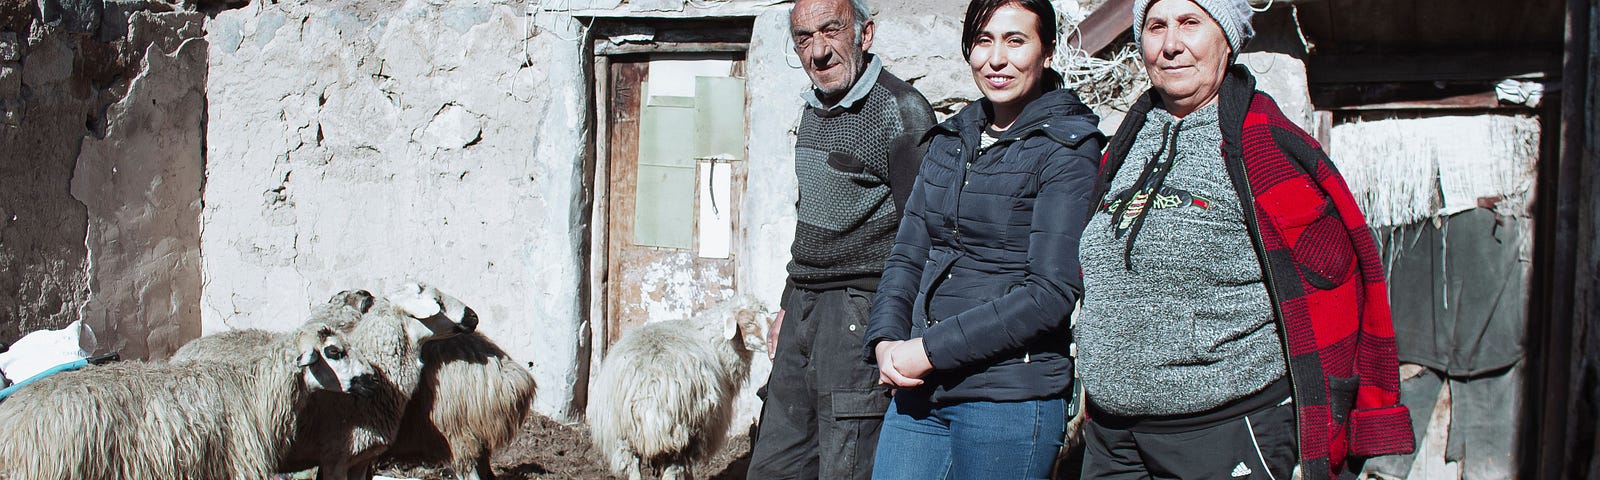 (from left to right) Gurgen, Roza, and Luba Serobyan stand in front of their new house in Mets Masrik, Gegharkunik Province